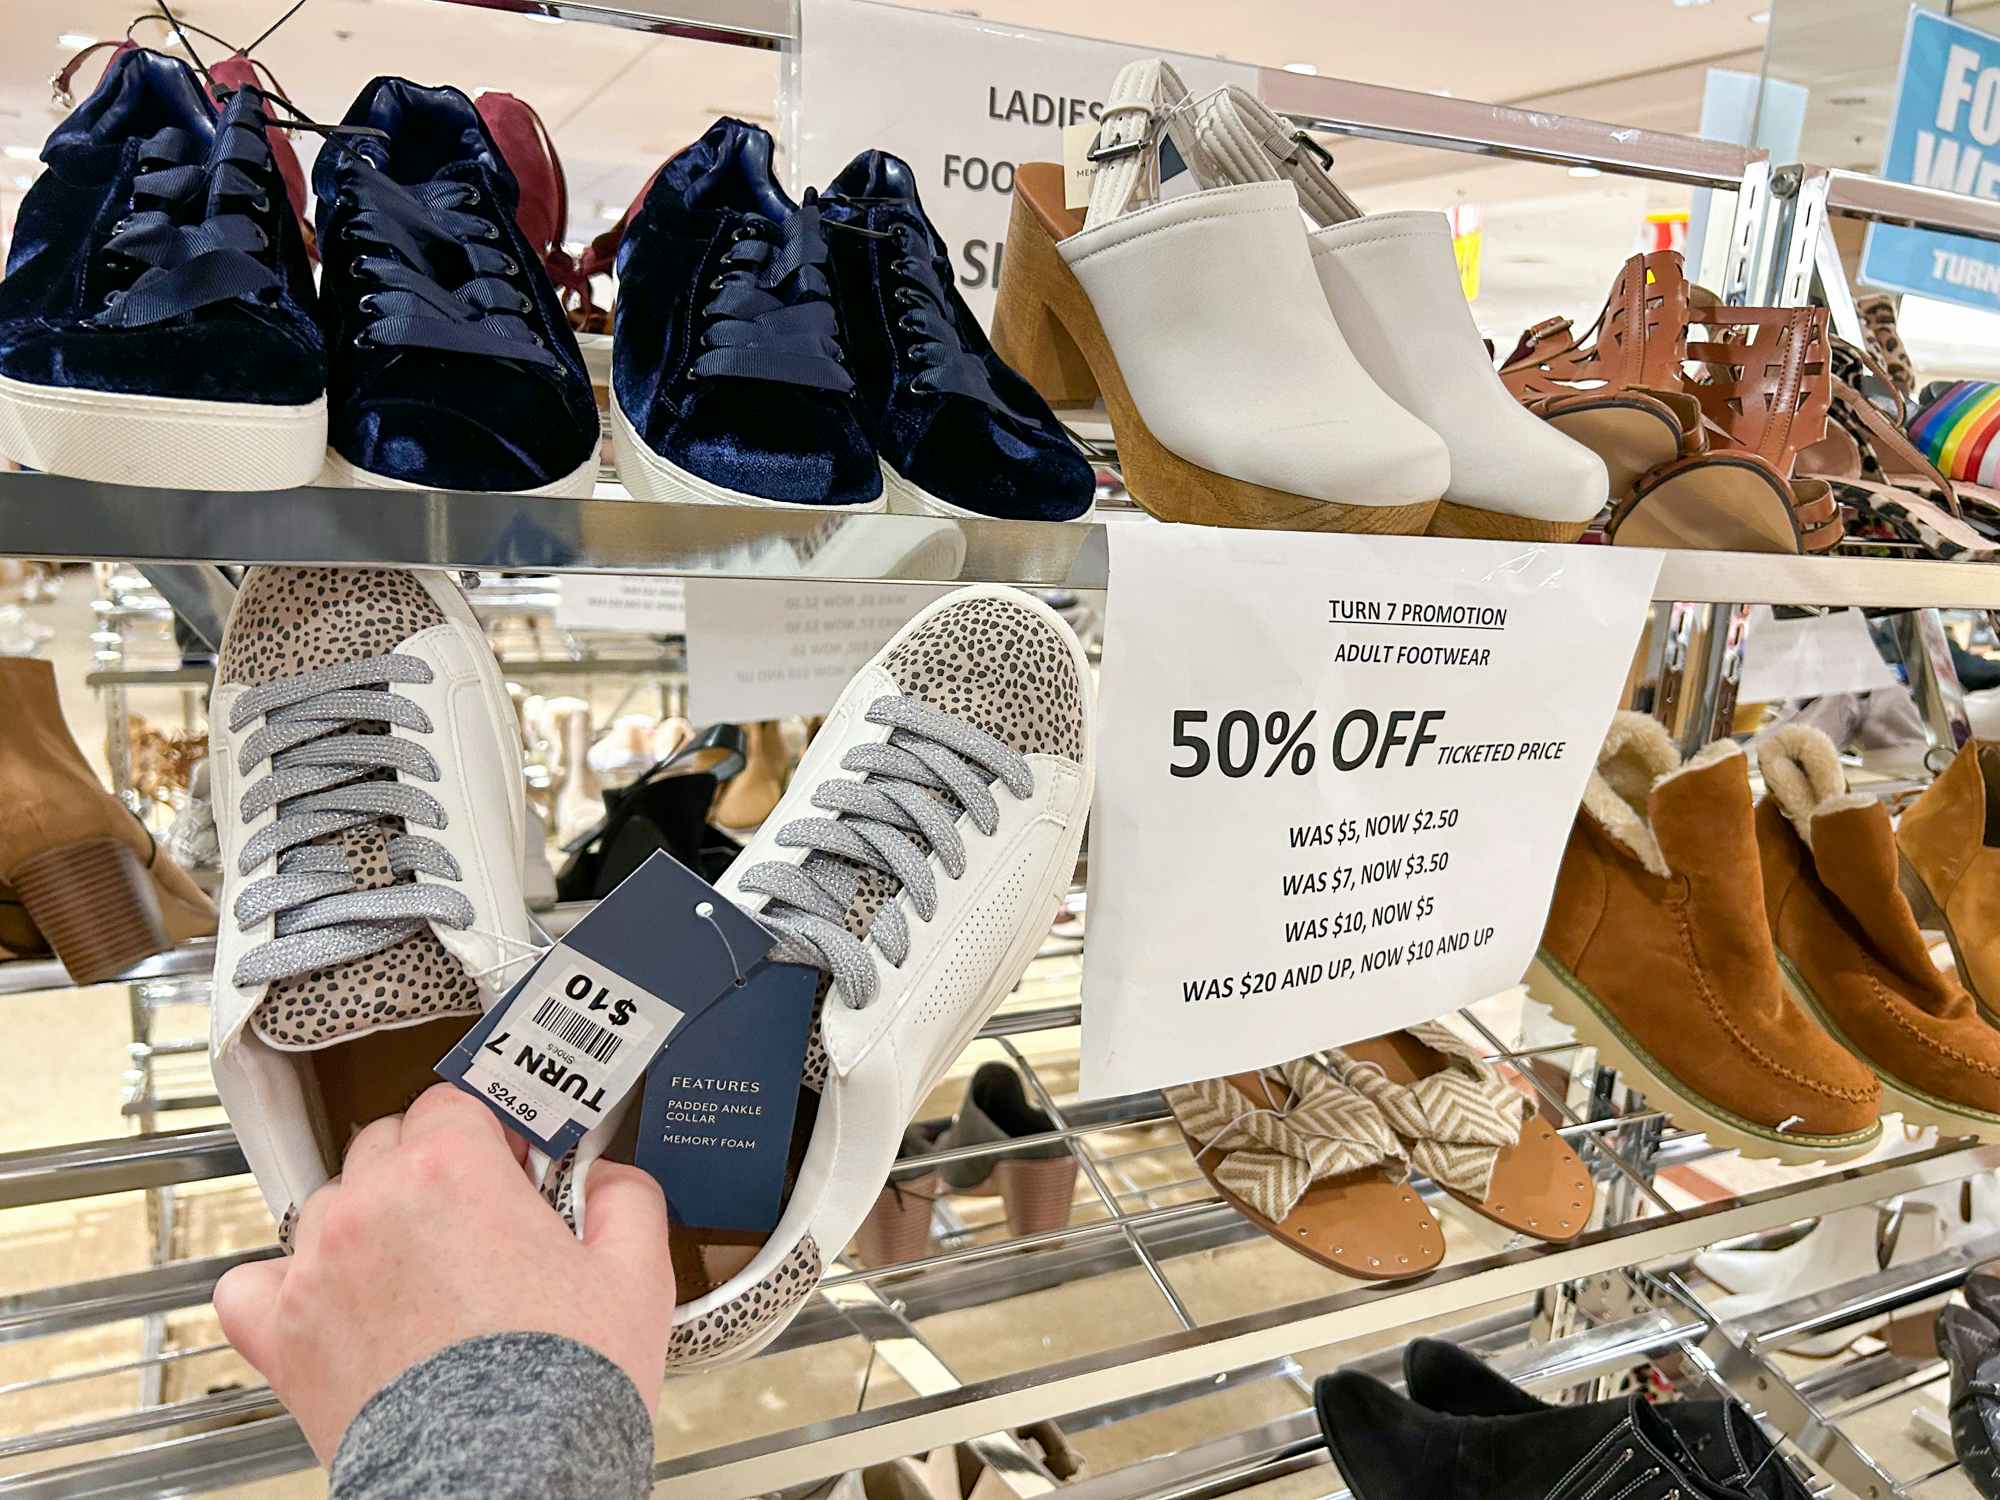 Sneakers marked $10 next to a sign saying they are 50% off